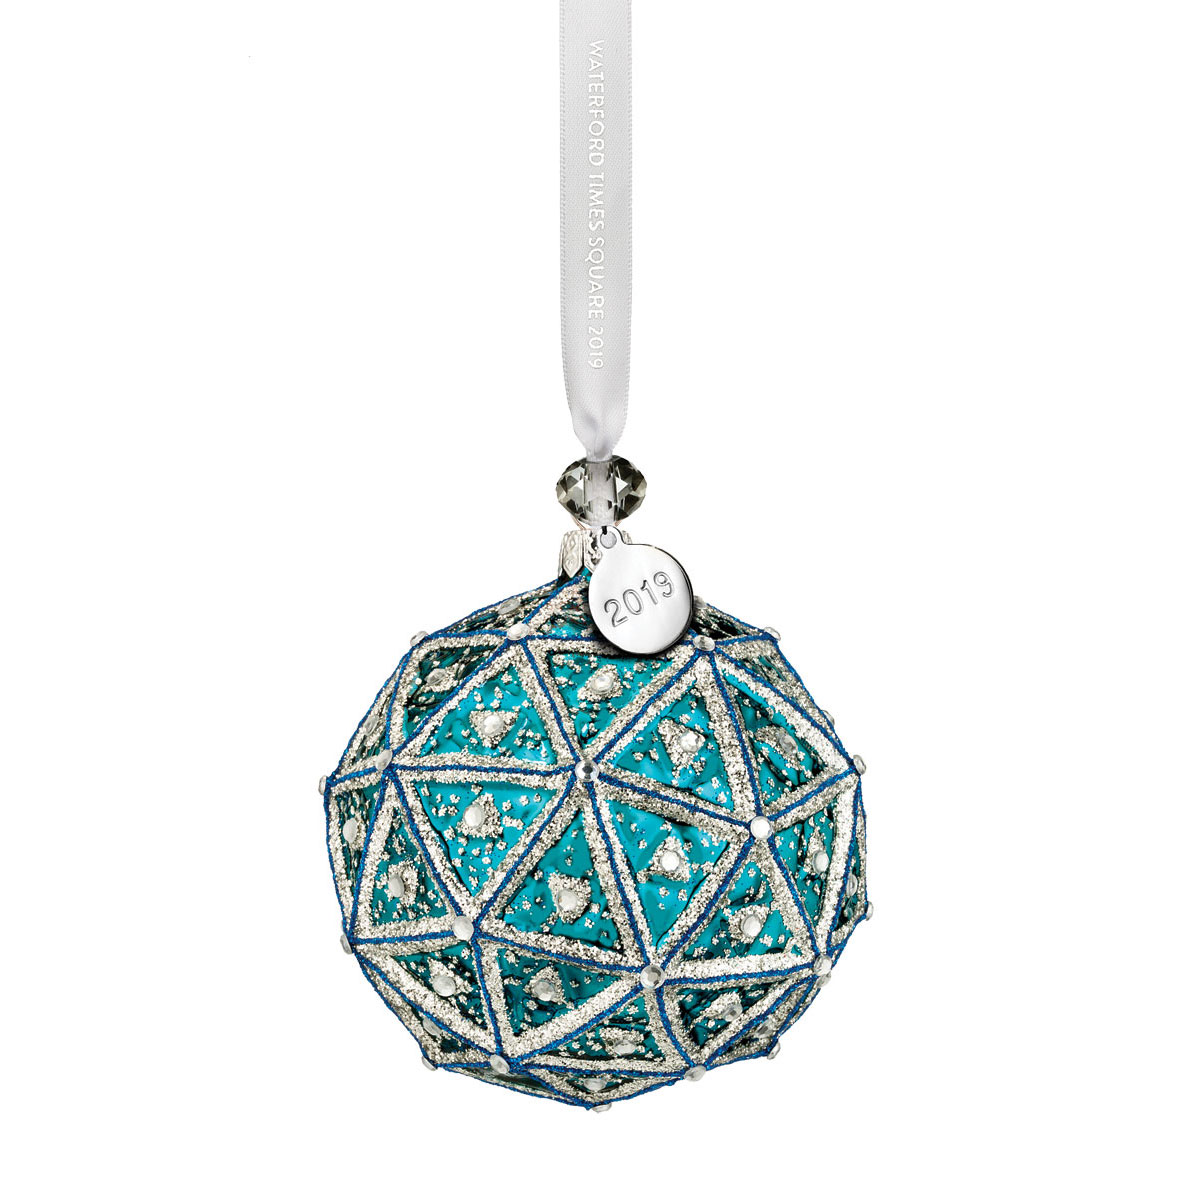 Waterford 2019 Times Square Replica Ball Ornament